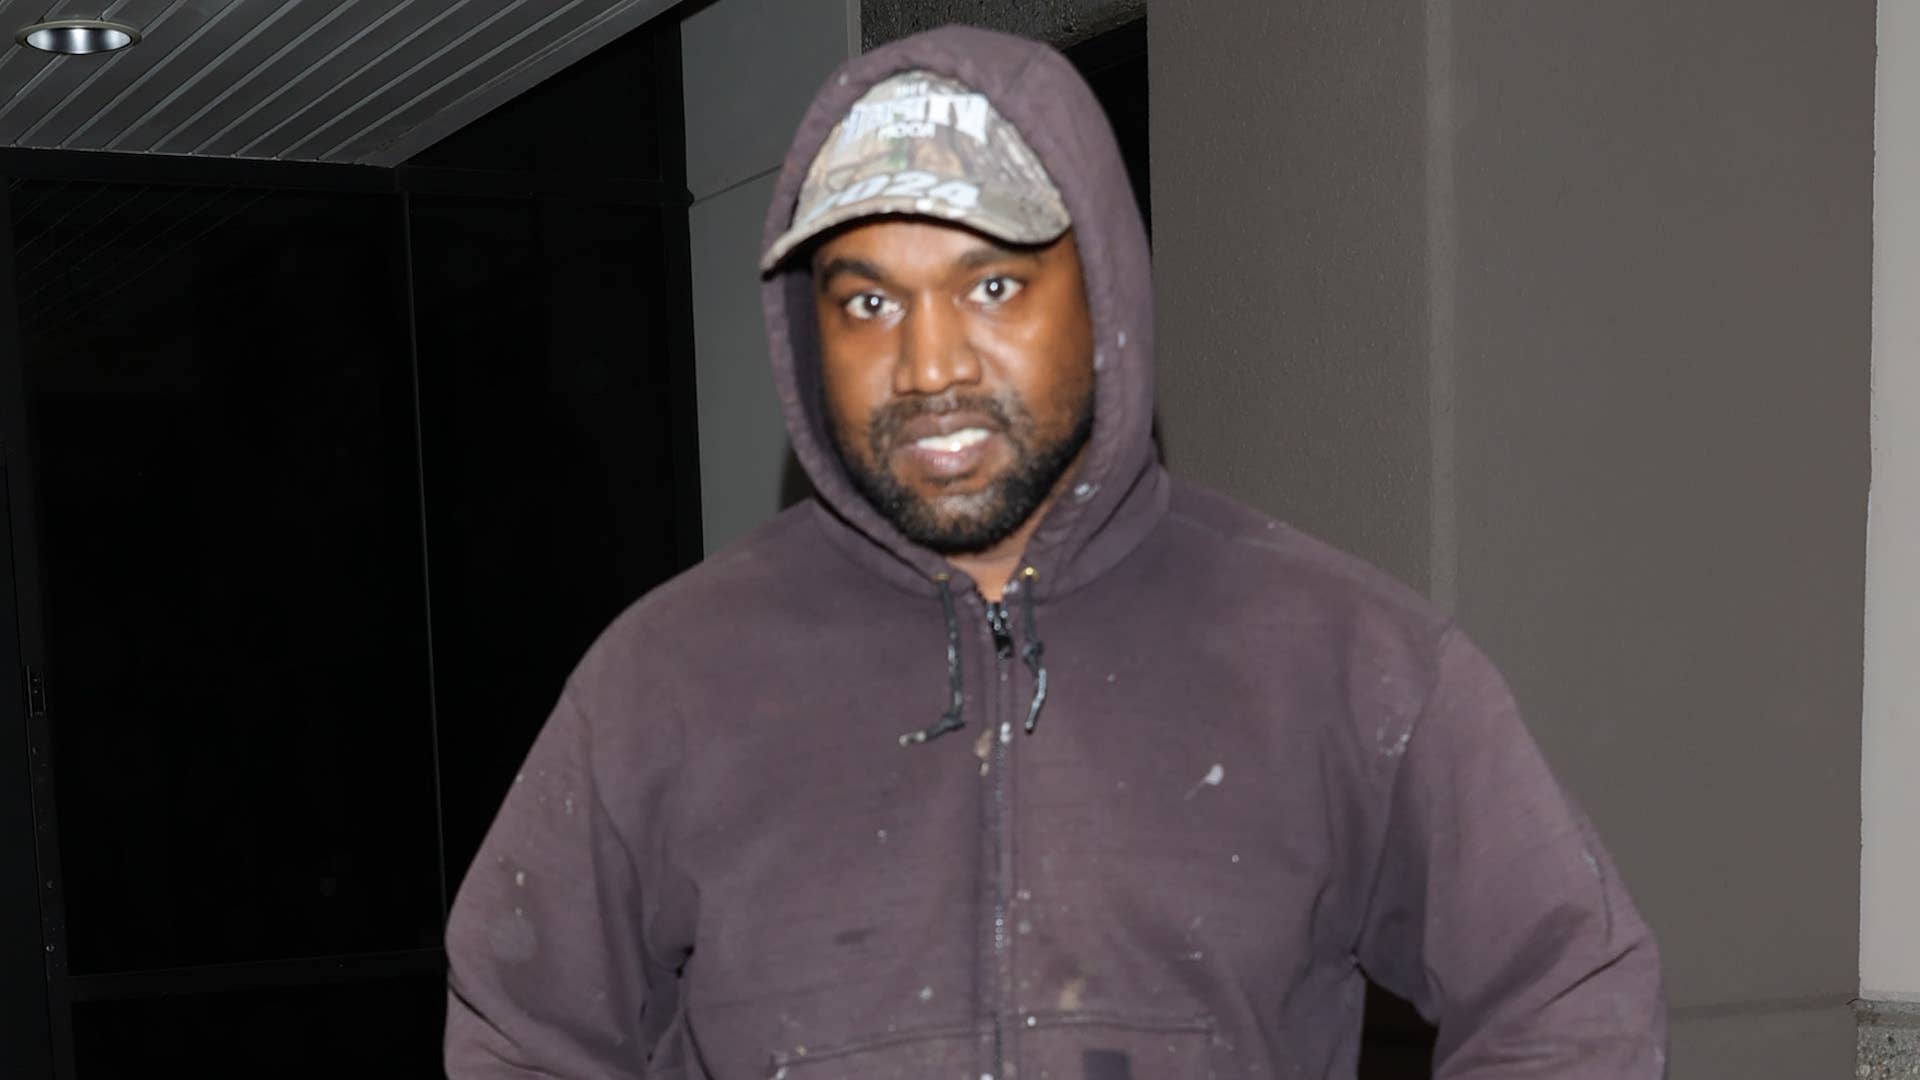 CAA cuts ties with kanye west over anti-Semitism